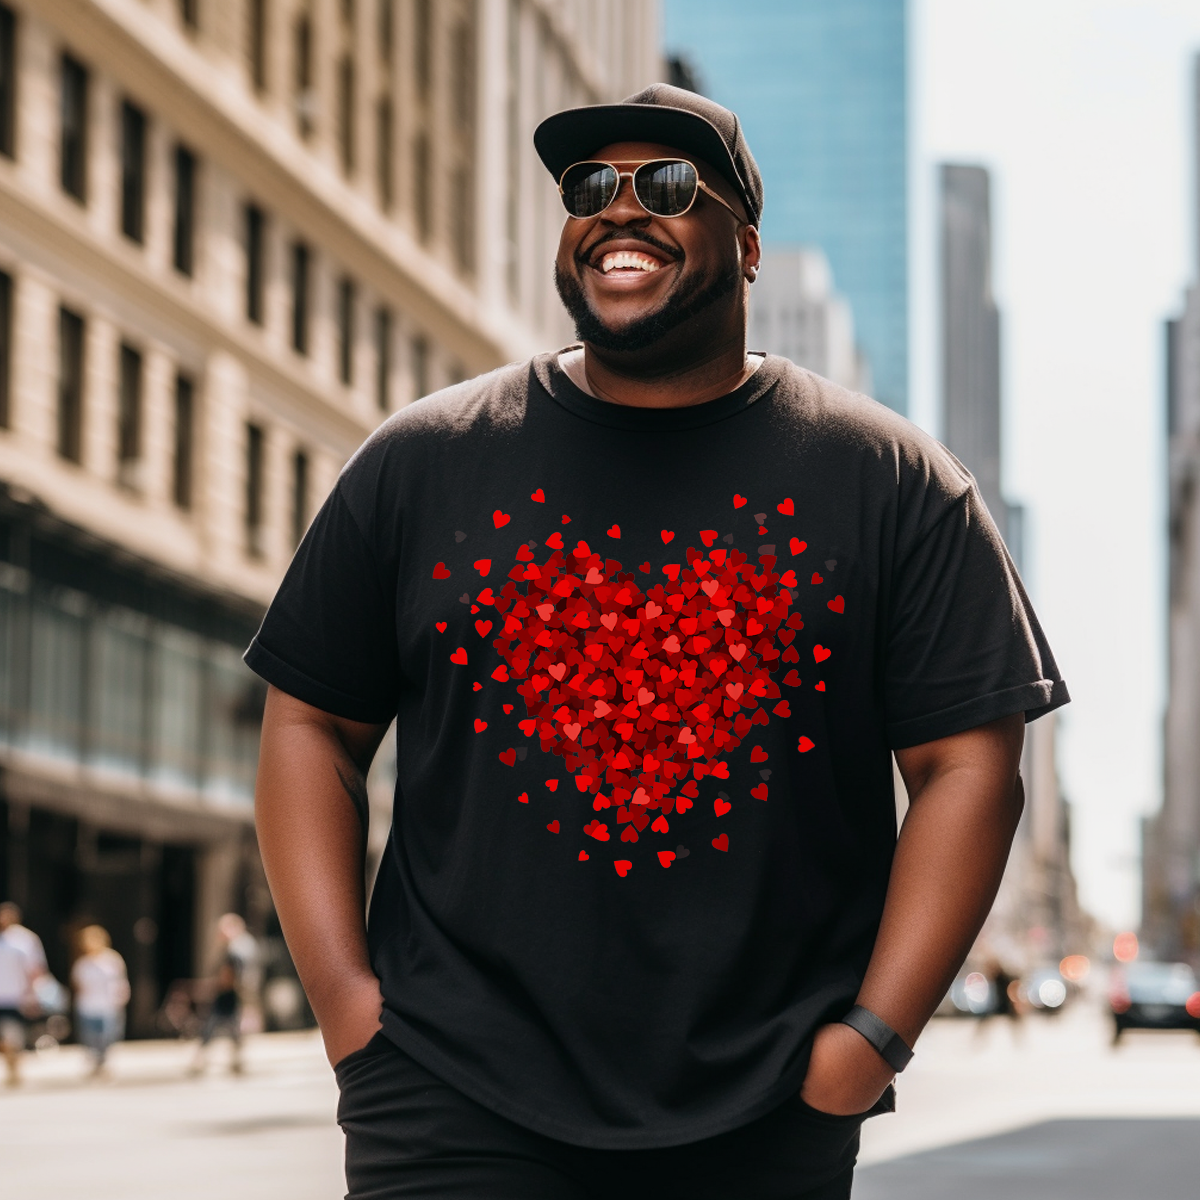 Love Heart Graphic Valentine's Day T-Shirt, Men Plus Size Oversize T-shirt for Big & Tall Man